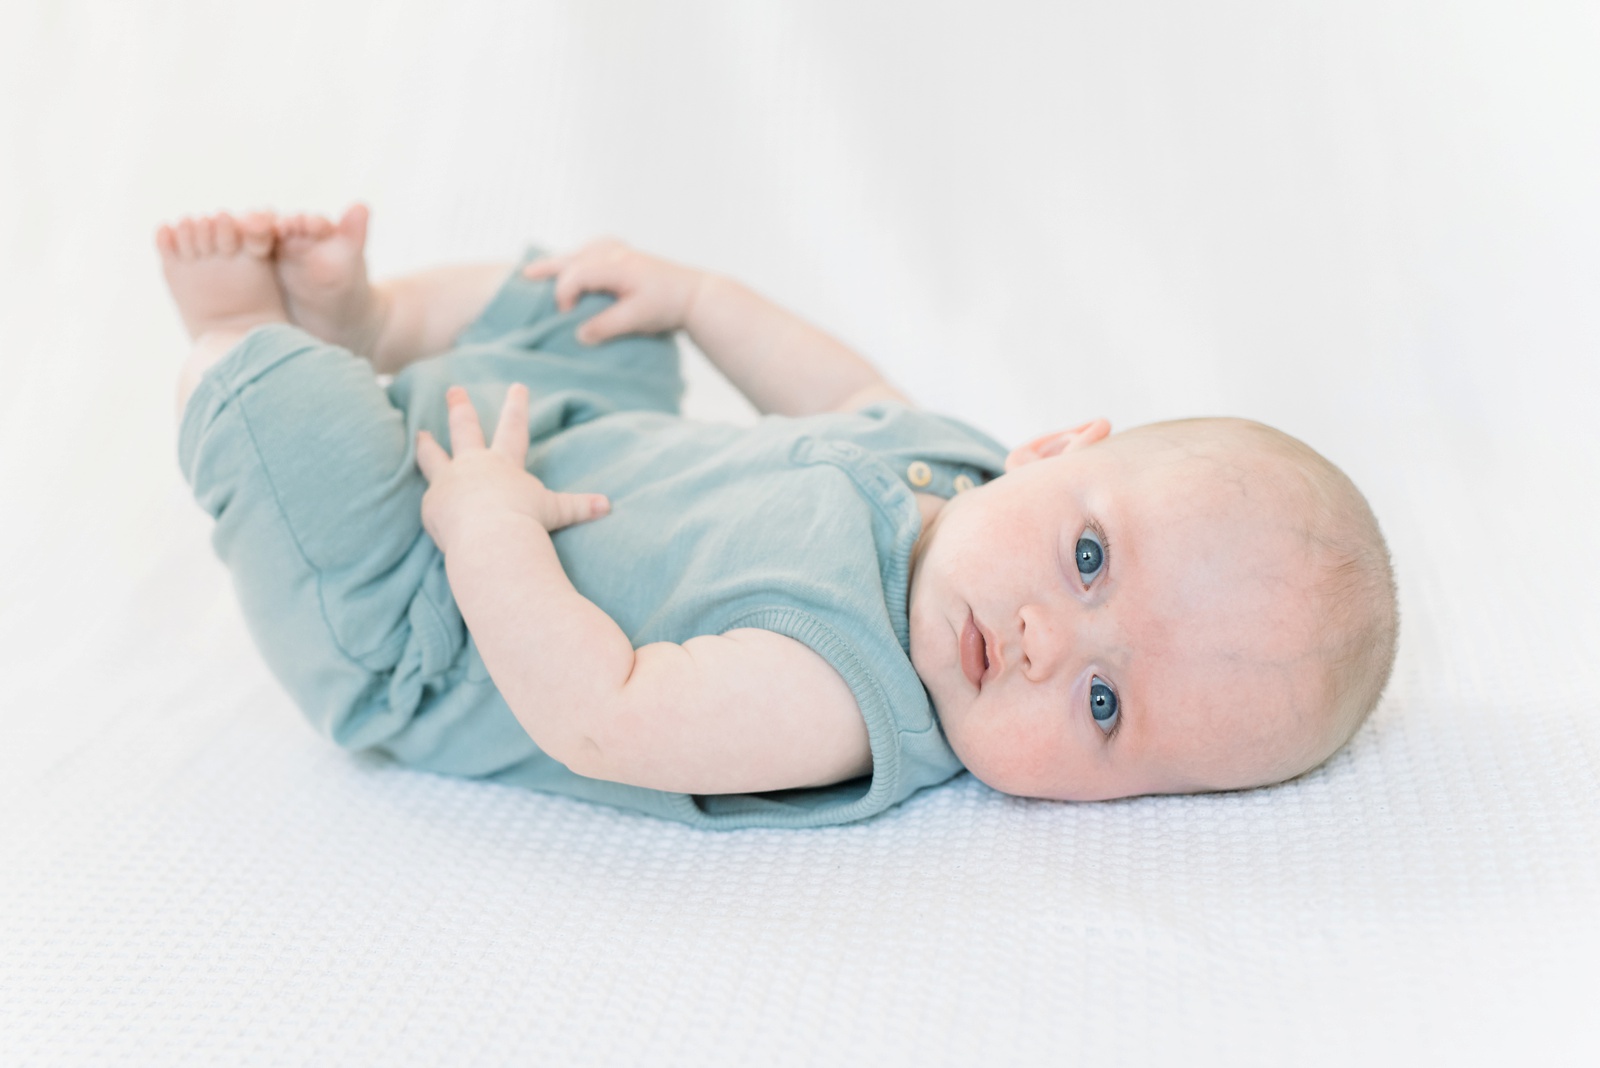 sweet-baby-james-allen-4-and-5-months-old-photo_7607.jpg